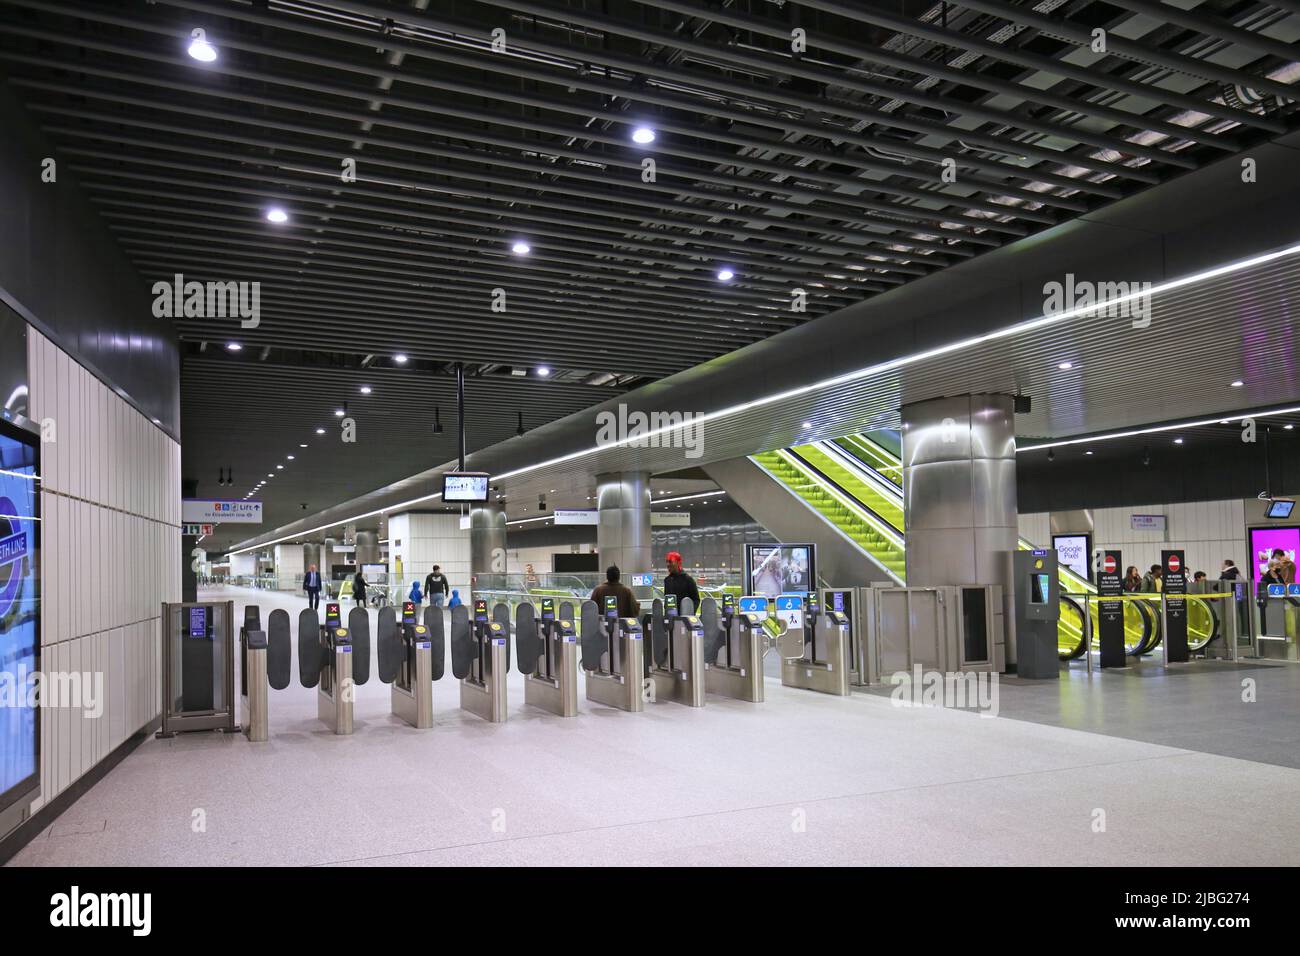 London, UK. New Elizabeth Line (Crossrail) station at Canary Wharf. Shows ticket barriers and escalators from entrance level. Stock Photo